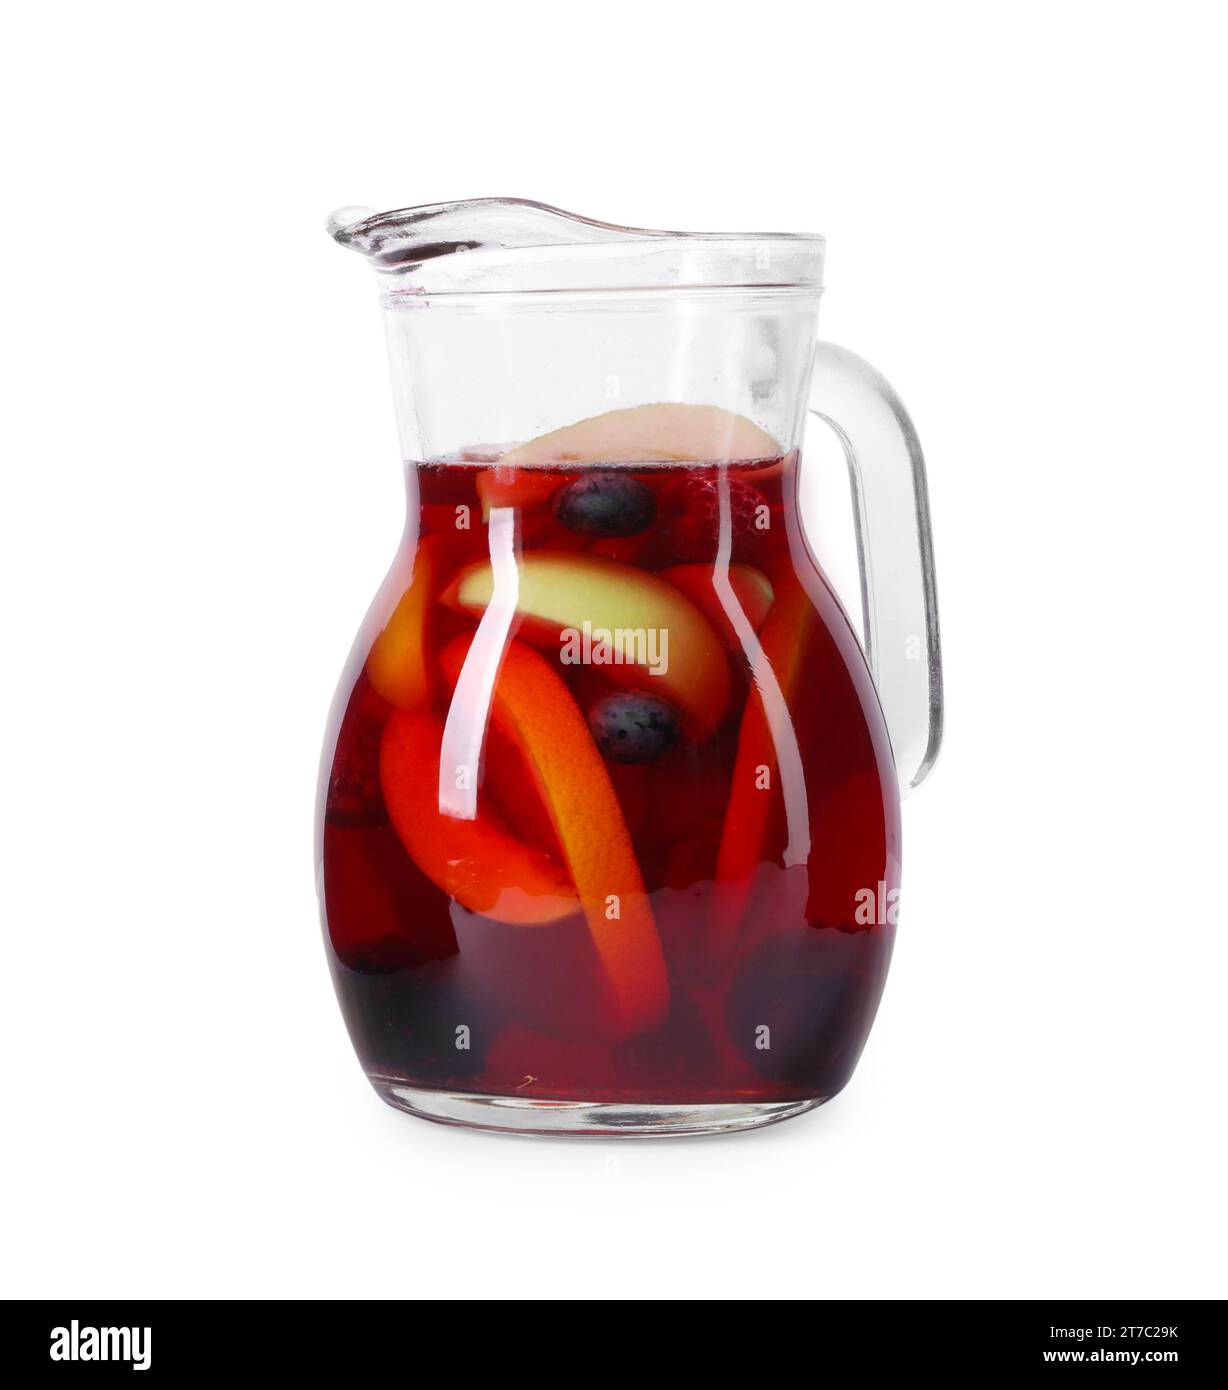 https://c8.alamy.com/comp/2T7C29K/glass-jug-of-delicious-sangria-isolated-on-white-2T7C29K.jpg